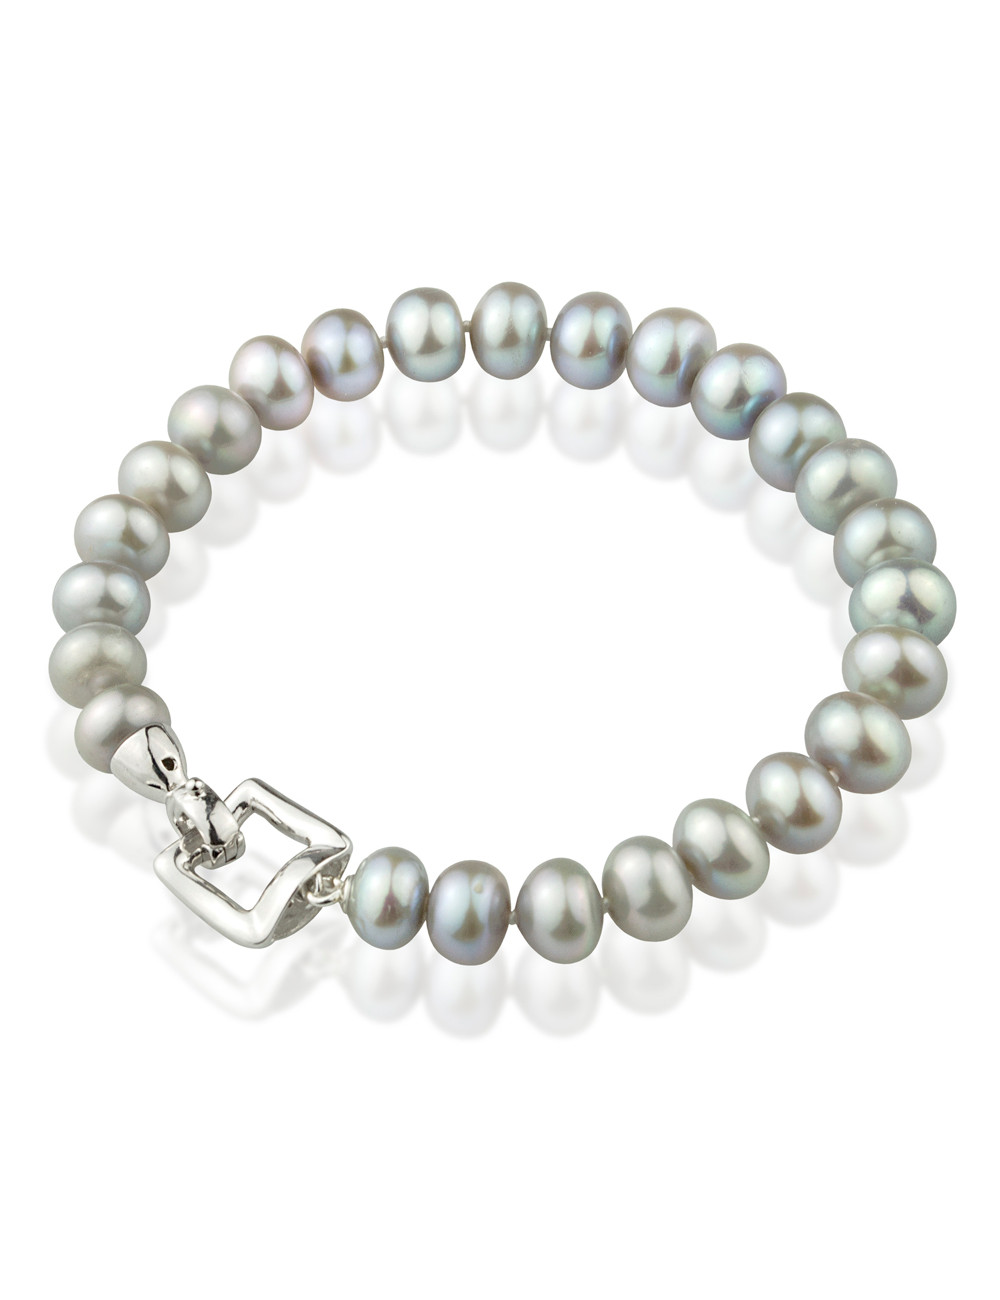 Bracelet of grey 3/4 round pearls with silver snap clasp- openwork square BO89Z626S